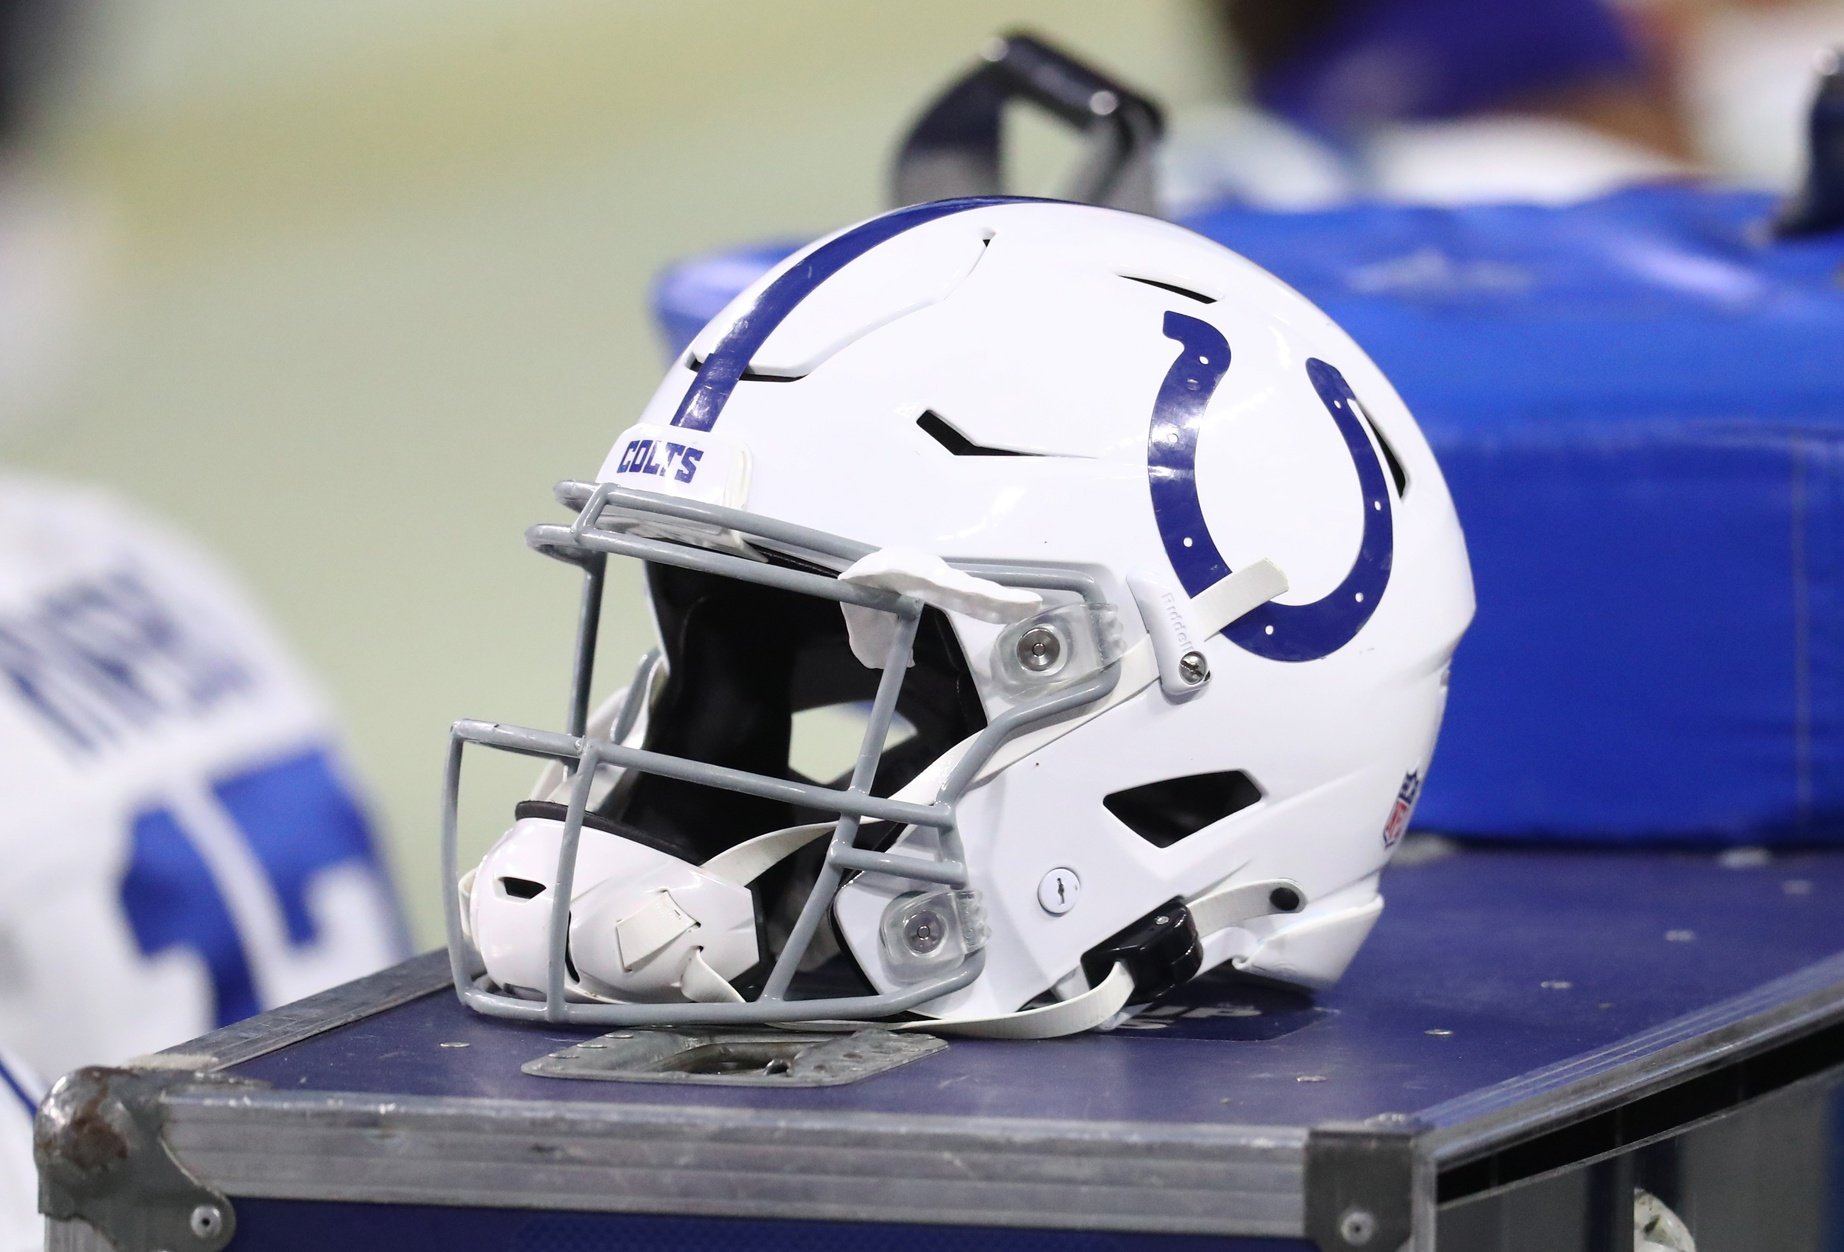 colts home schedule